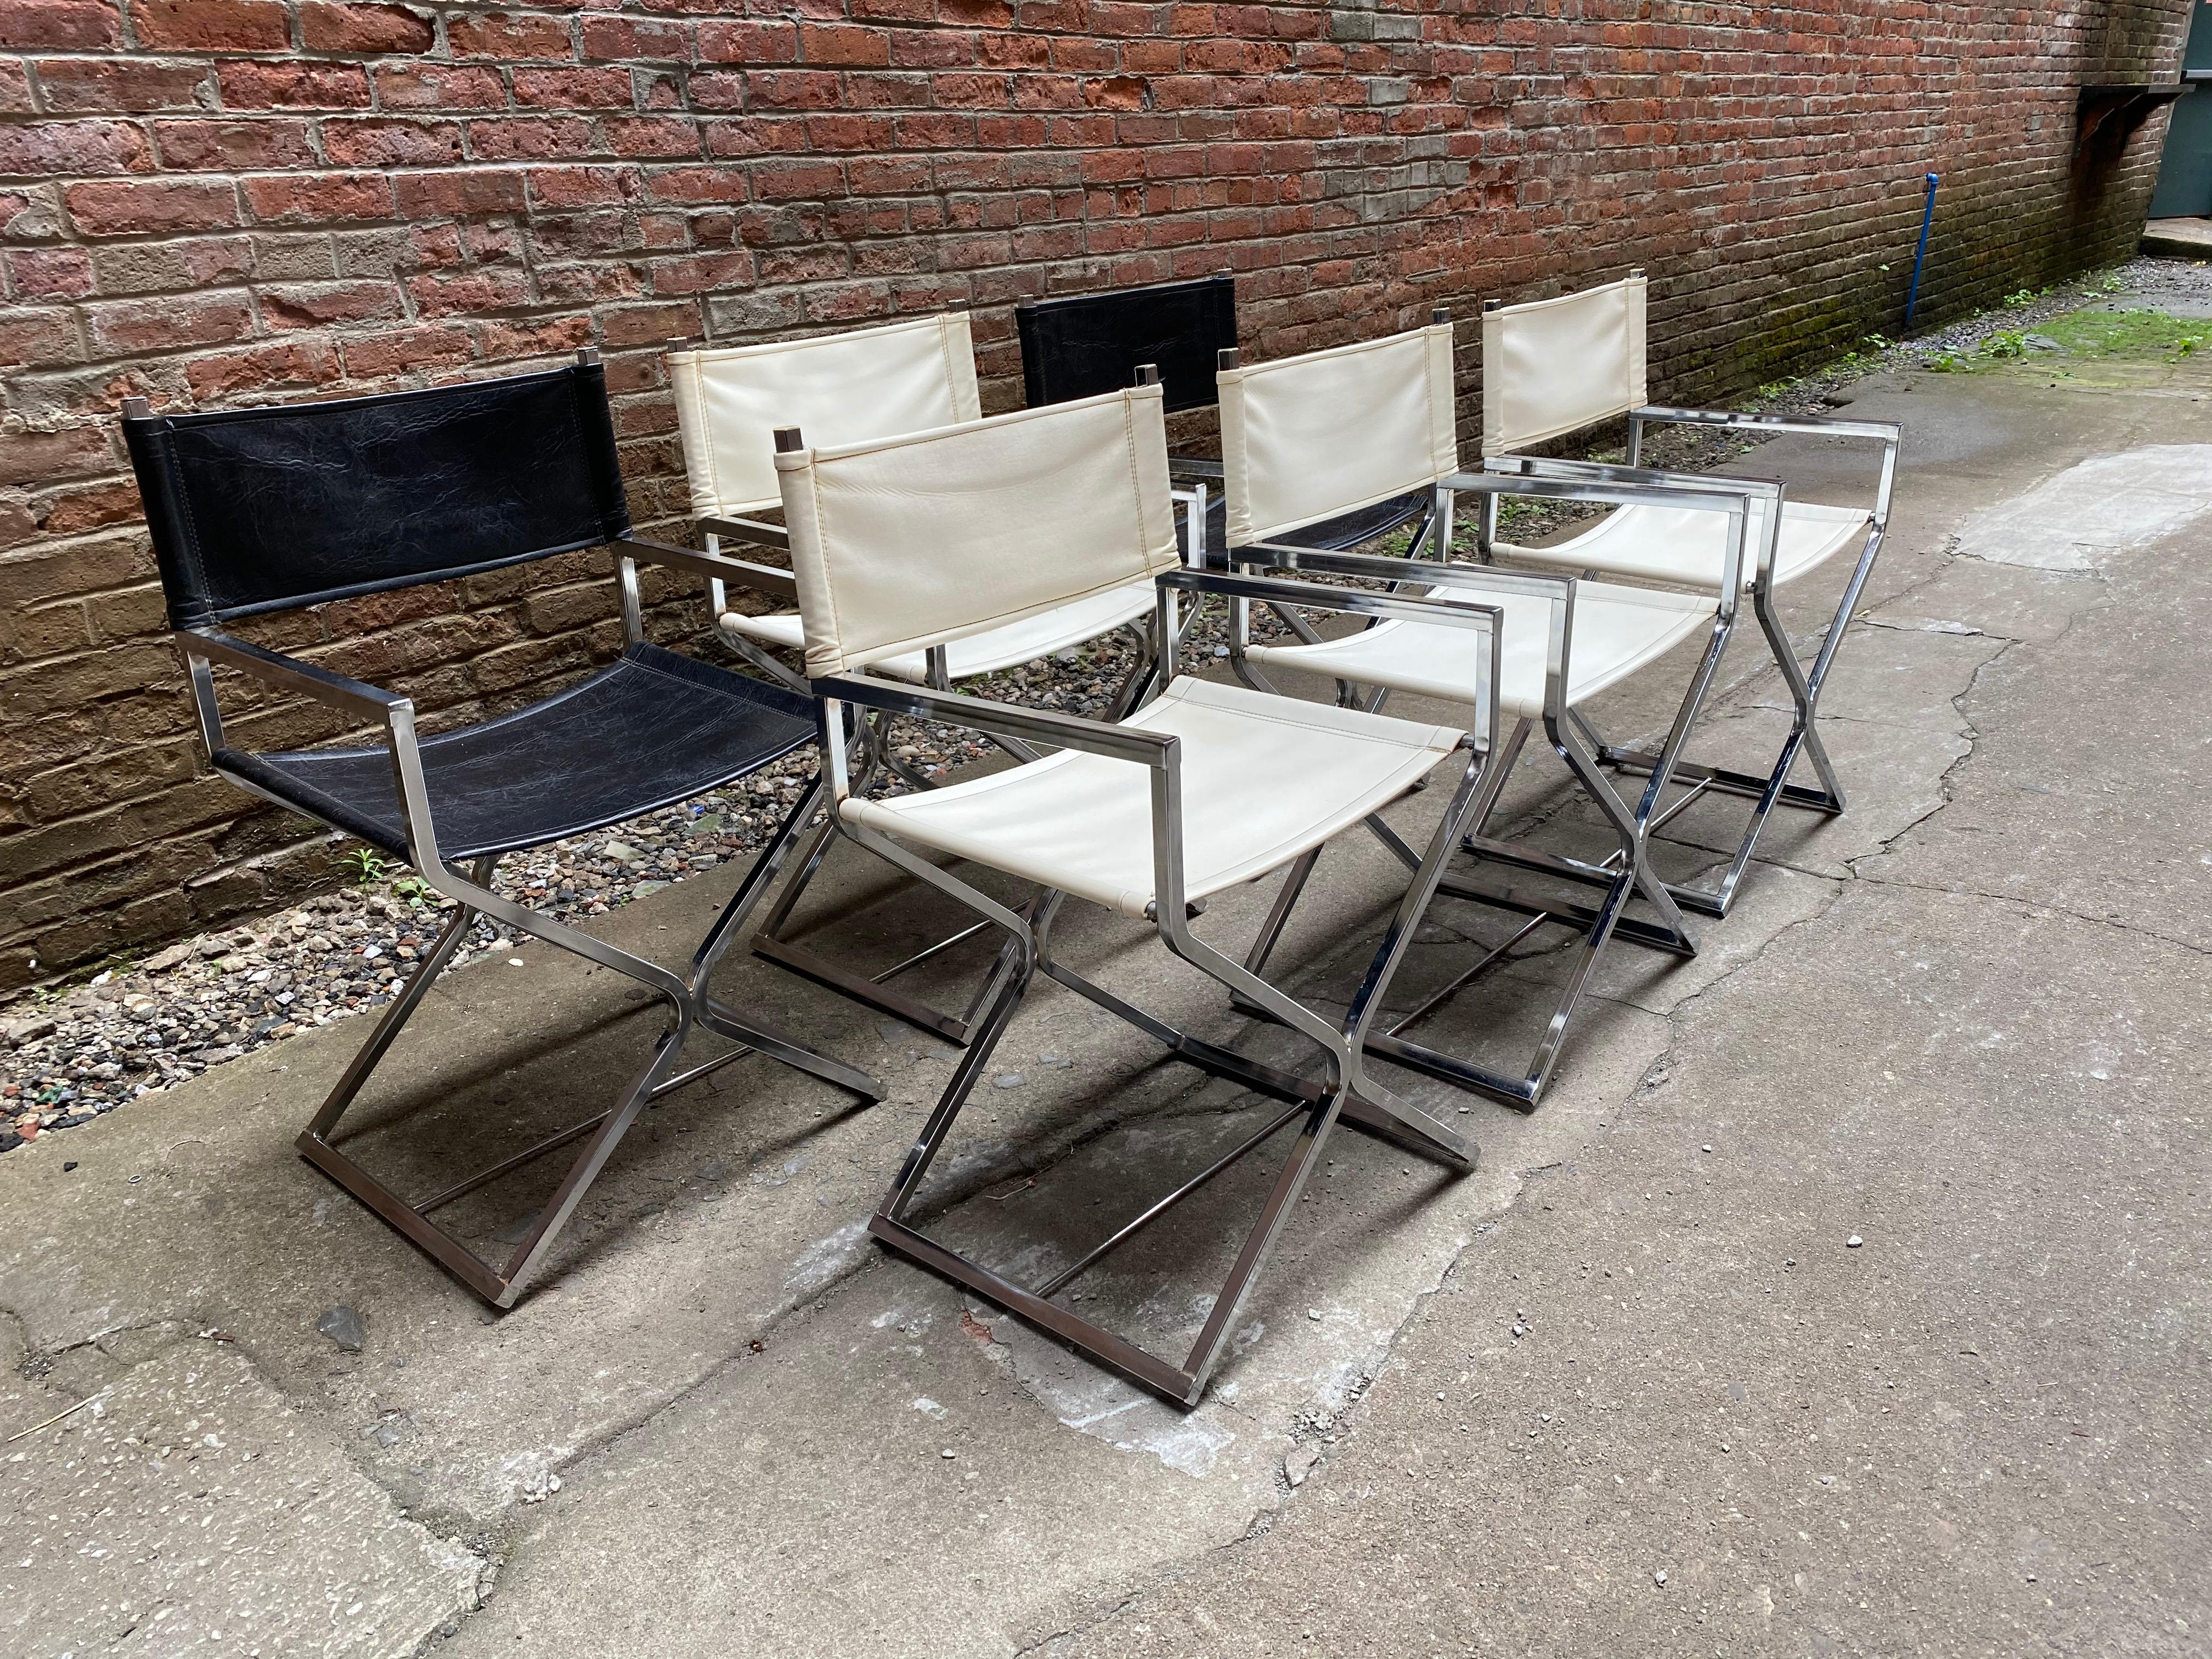 Set of six chrome and Naugahyde director chairs made by Virtue Brothers, Los Angeles, CA. Four white and two black. Chrome-plated frames with Naugahyde sling backs and seats. One still retains the original label, circa 1970.

Stylish and